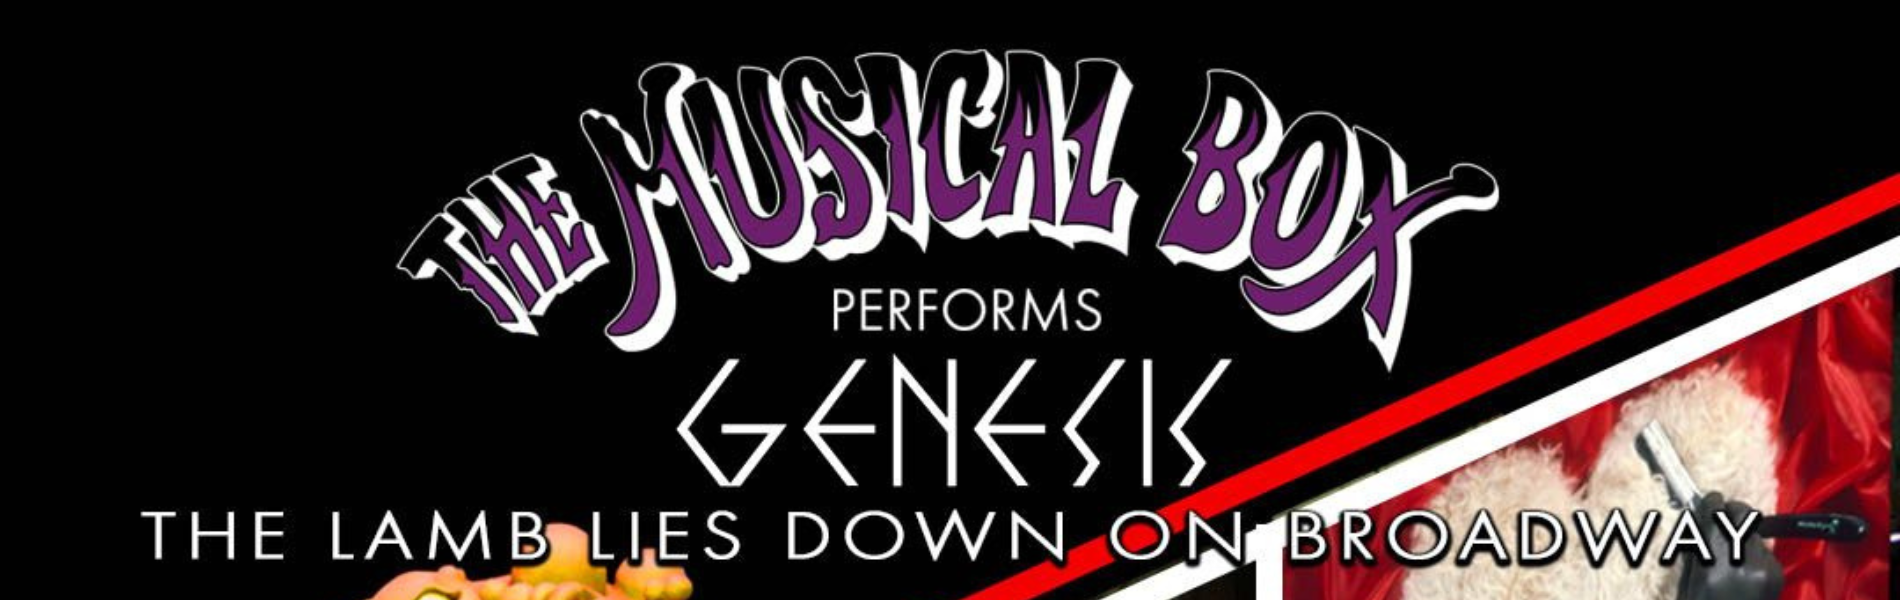 The words the Musical Box performs GENESIS - The Lamb Lies Down on Broadway.